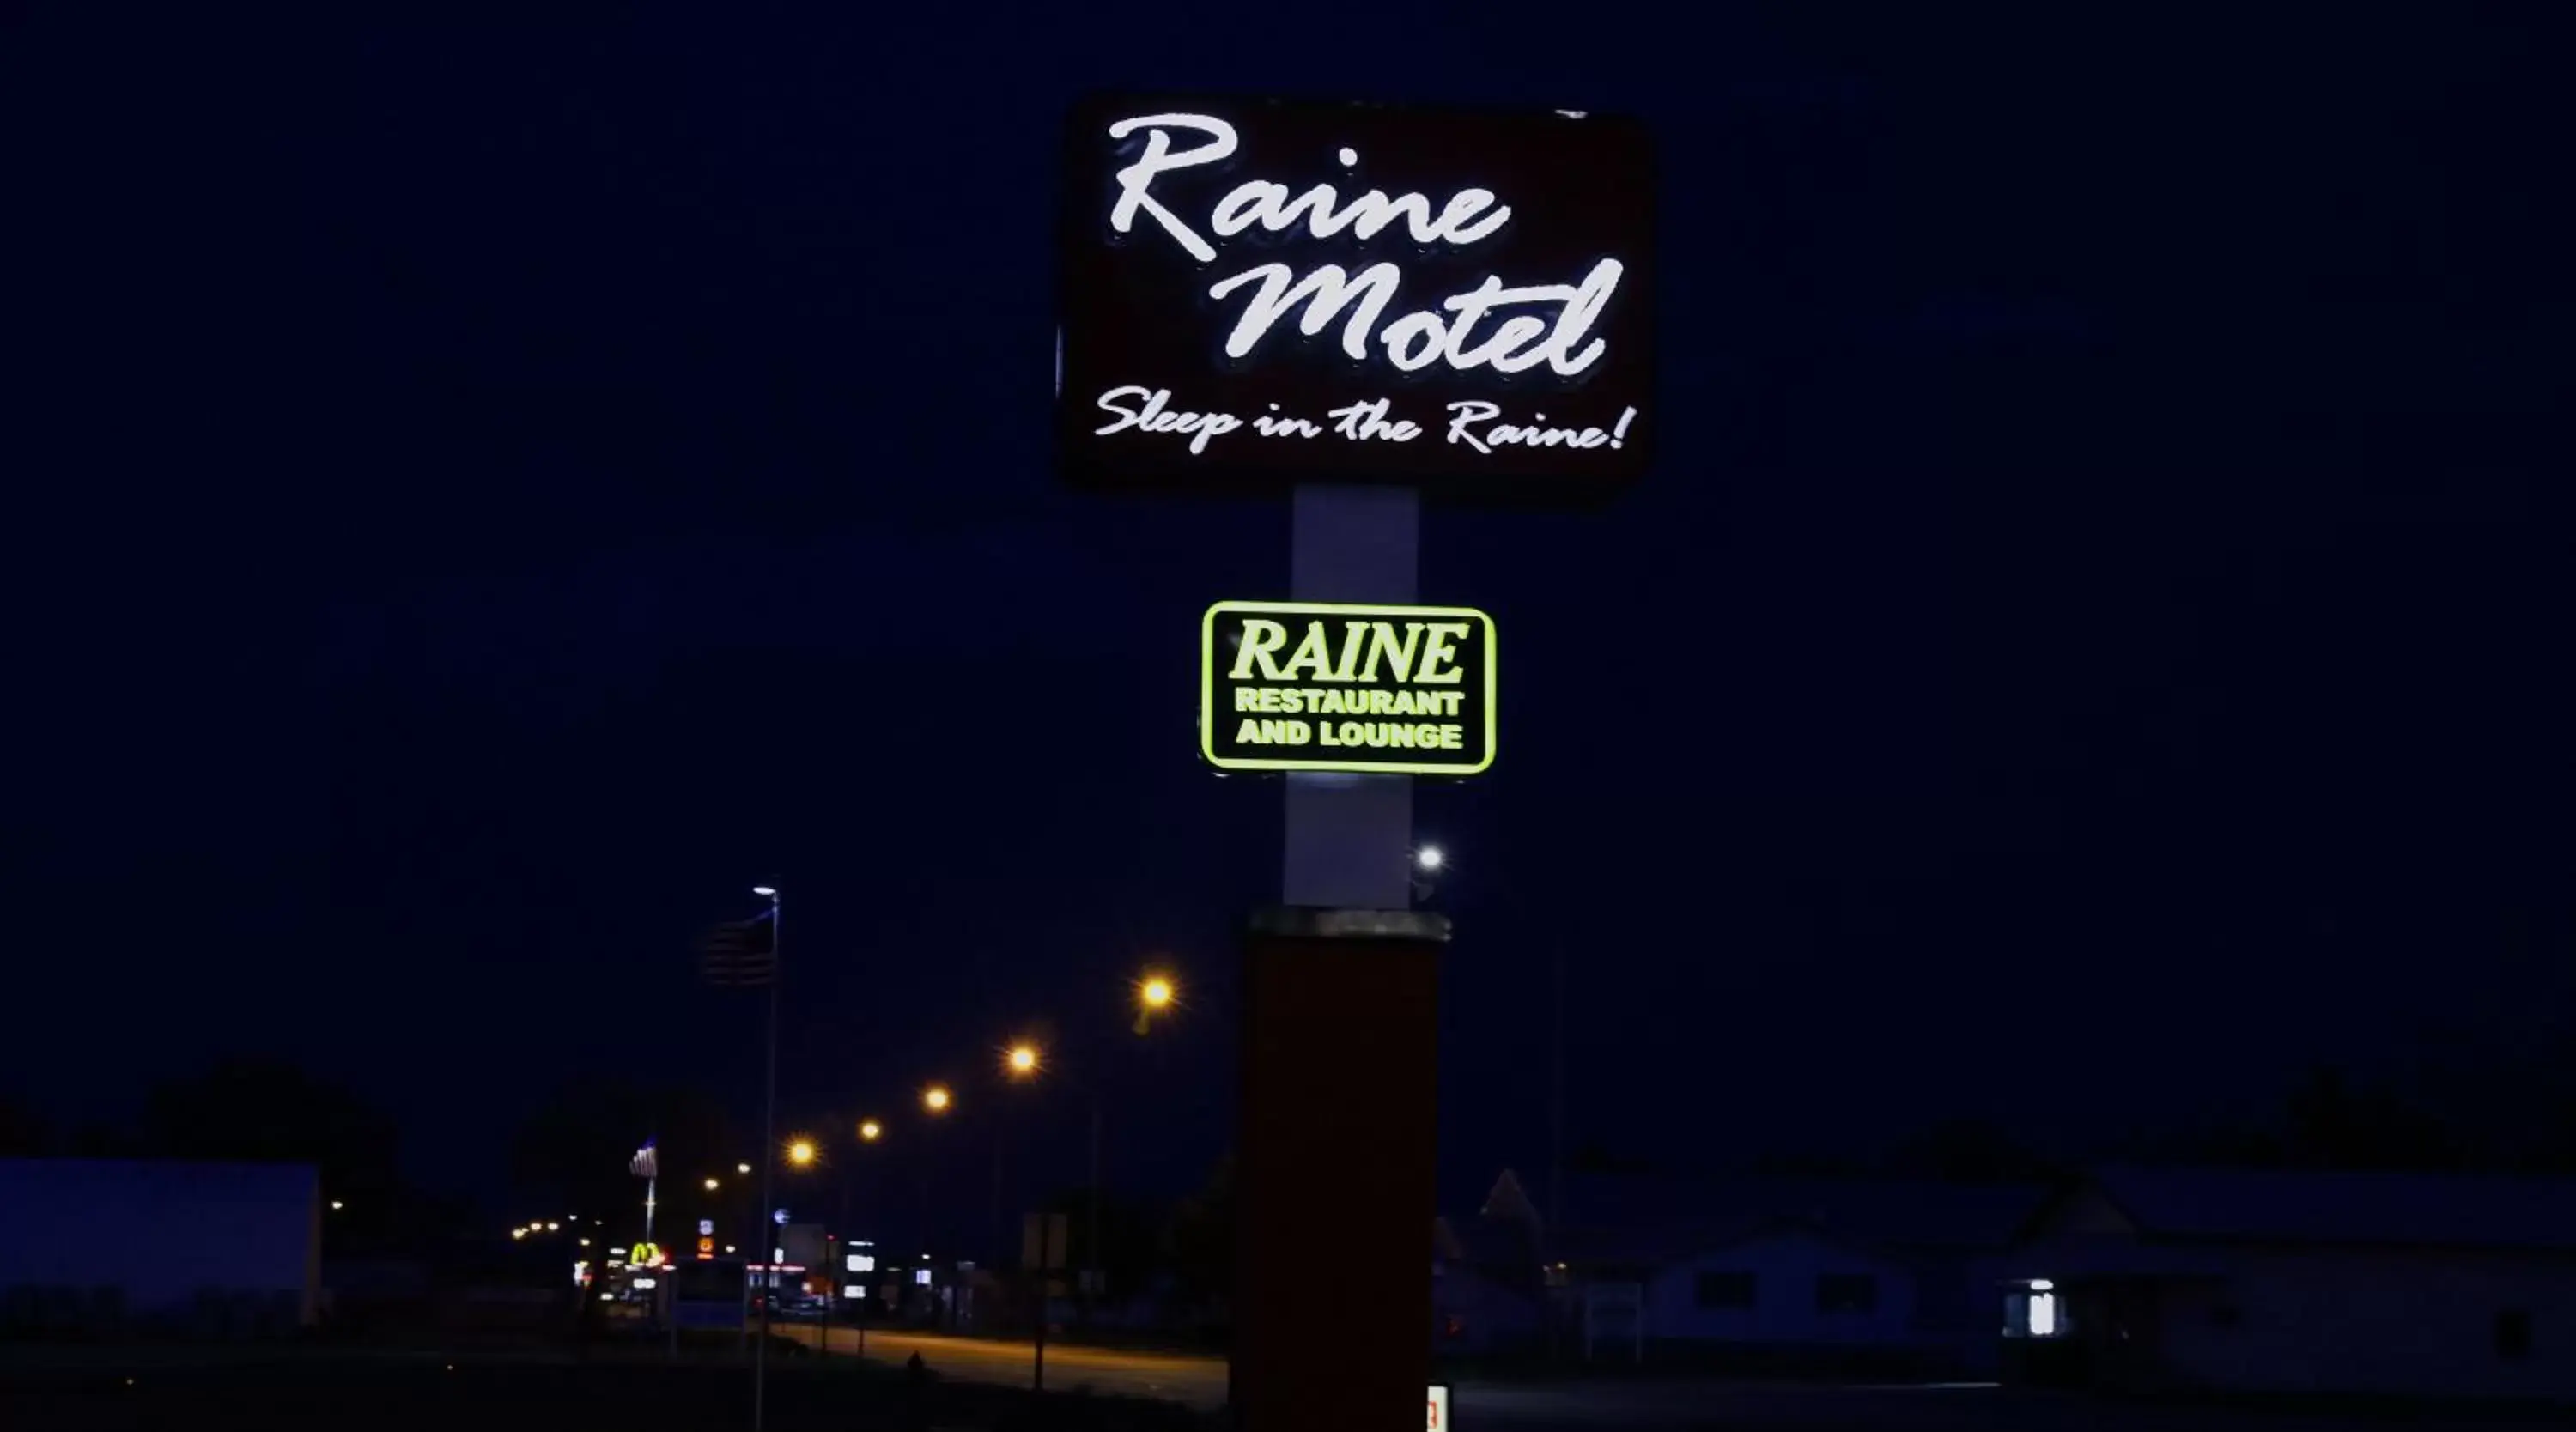 Property logo or sign in Raine Motel